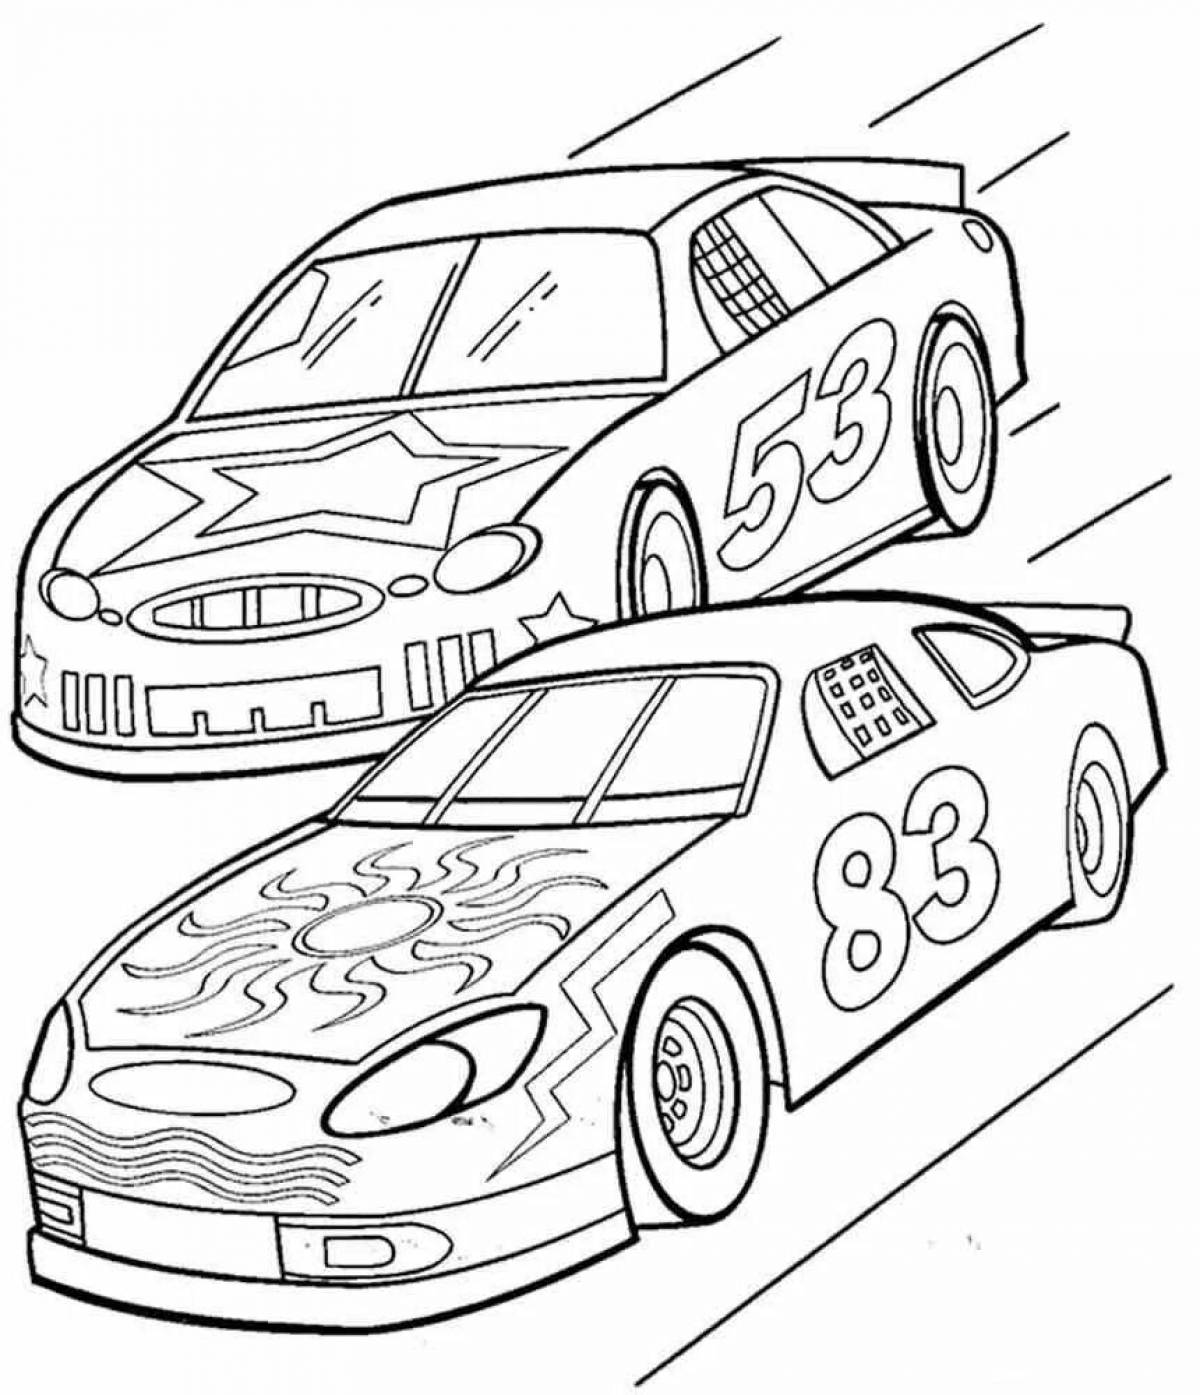 Fun coloring page turn on for boys